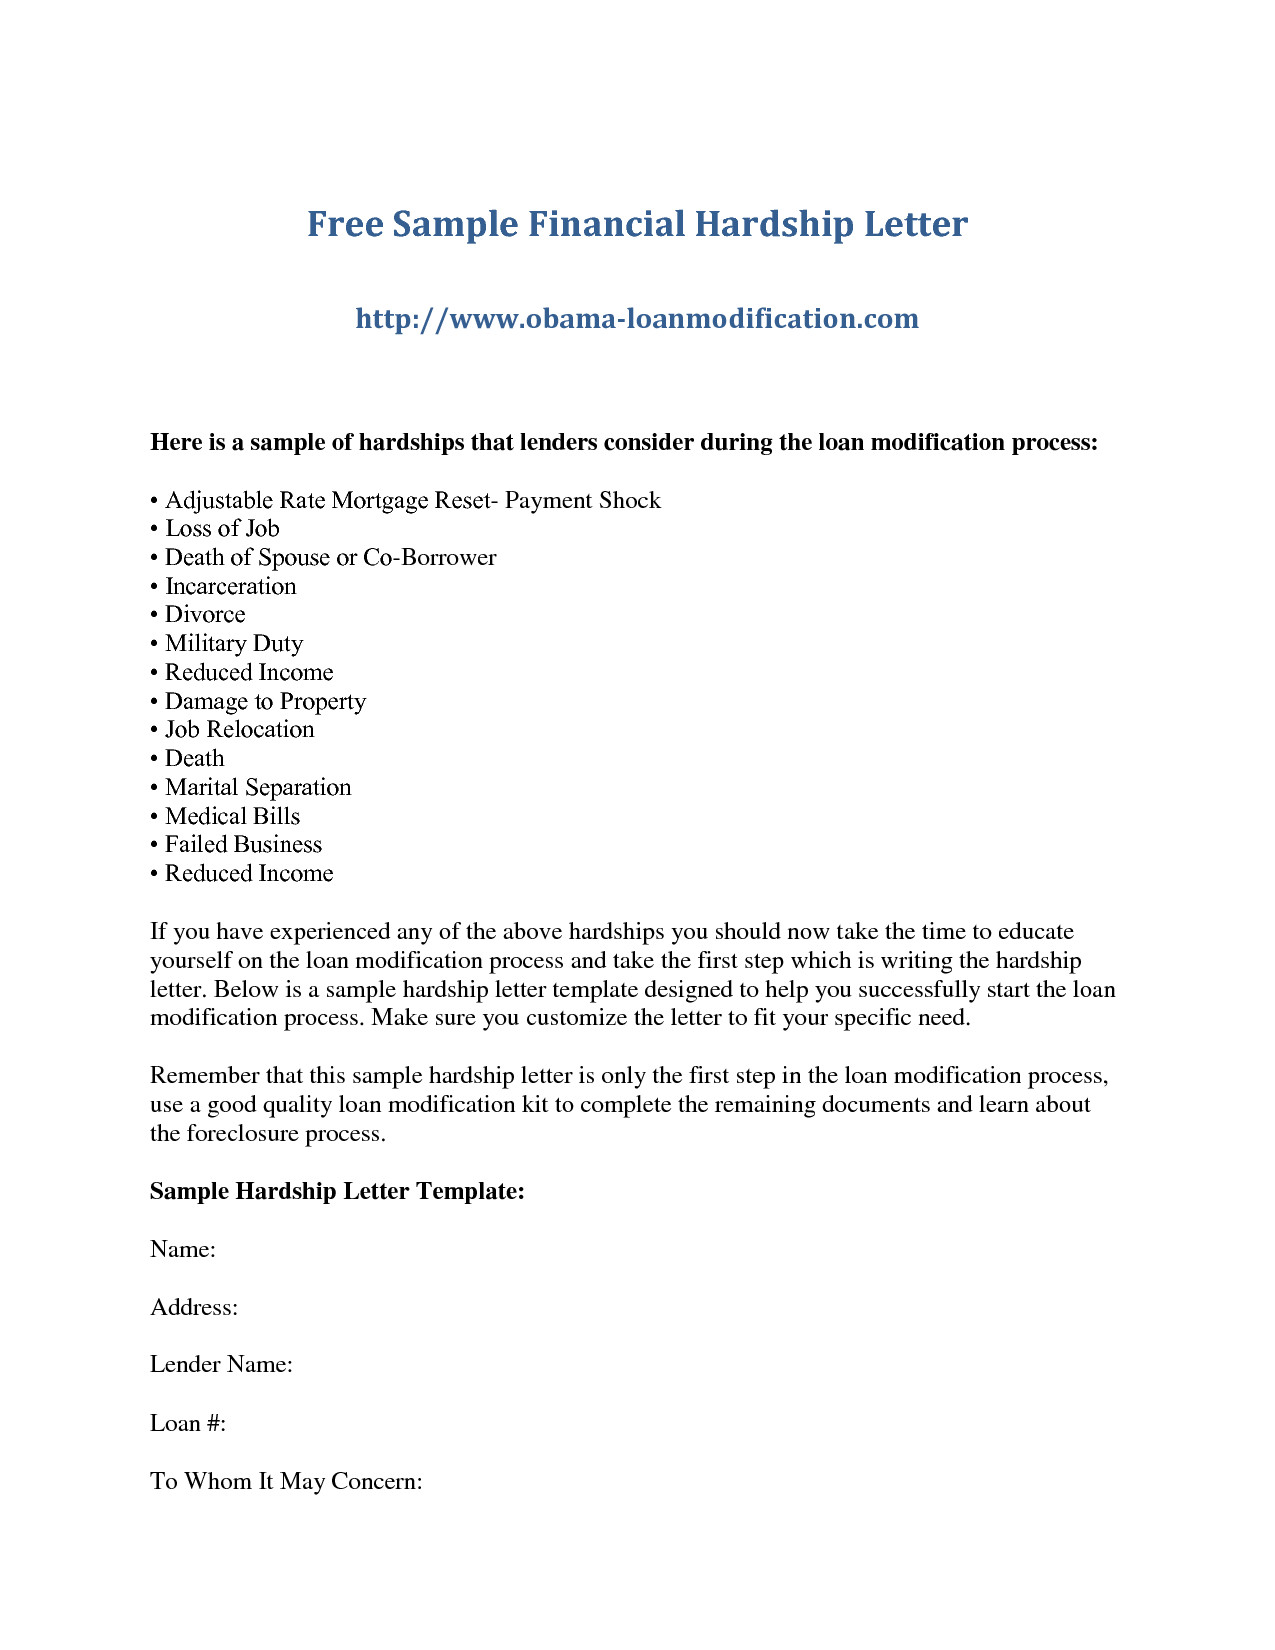 how to write a letter to a creditor for hardship Google